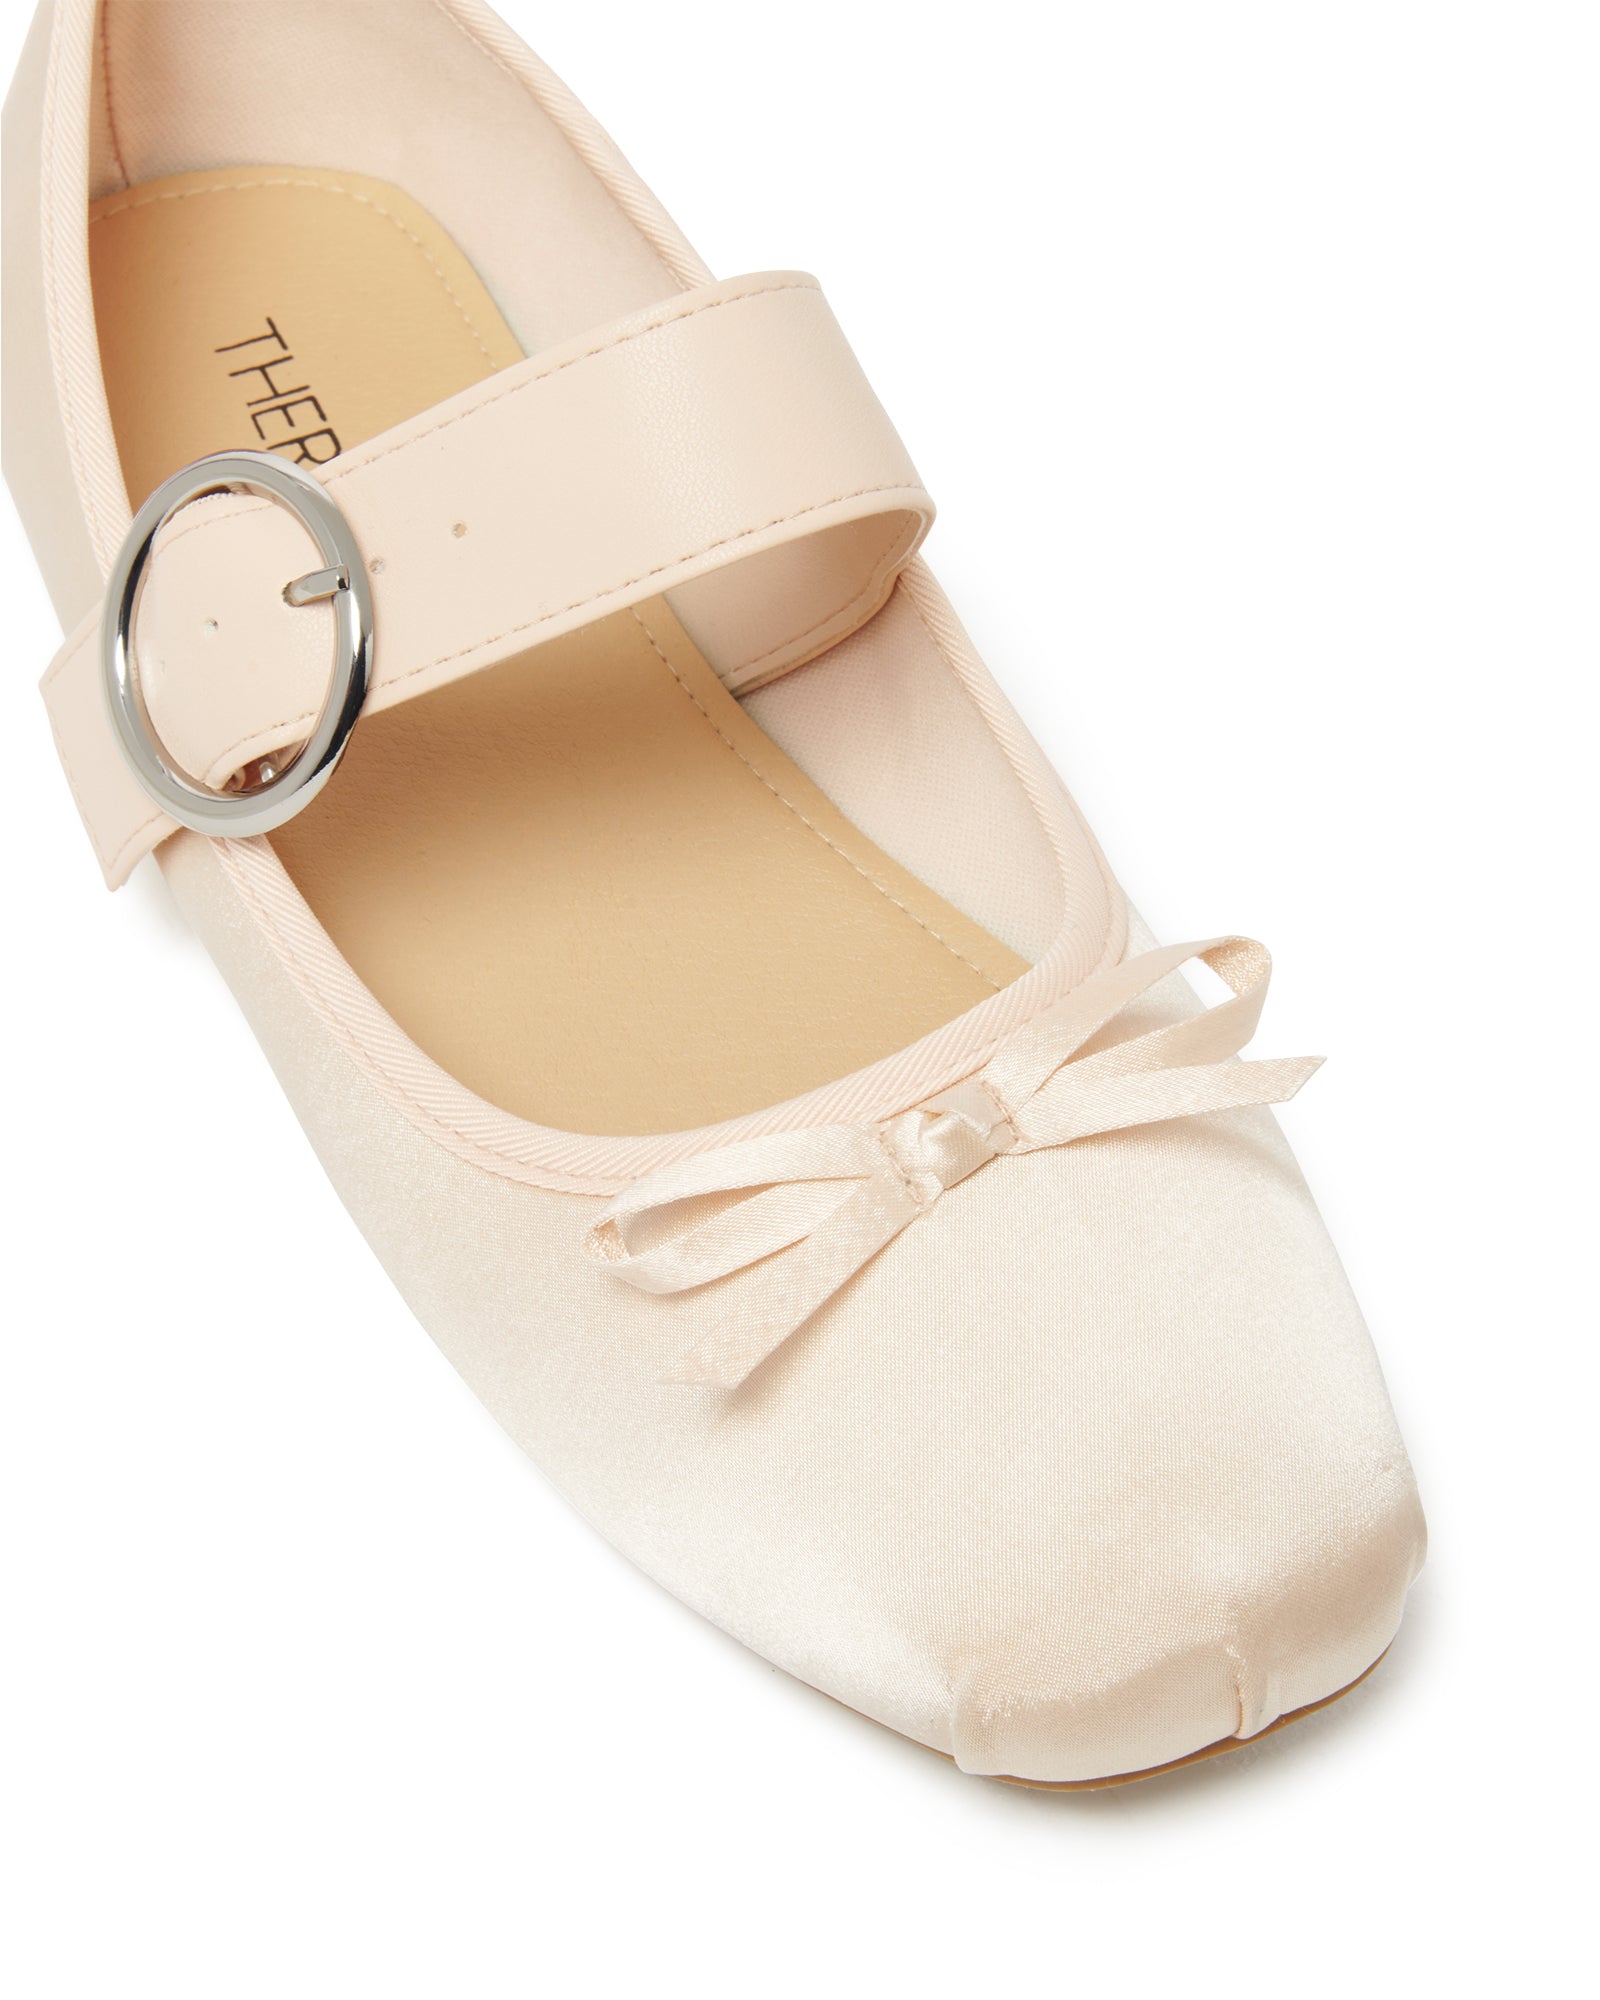 Therapy Shoes Mesmerize Blush Satin | Women's Flats | Ballet | Mary Jane